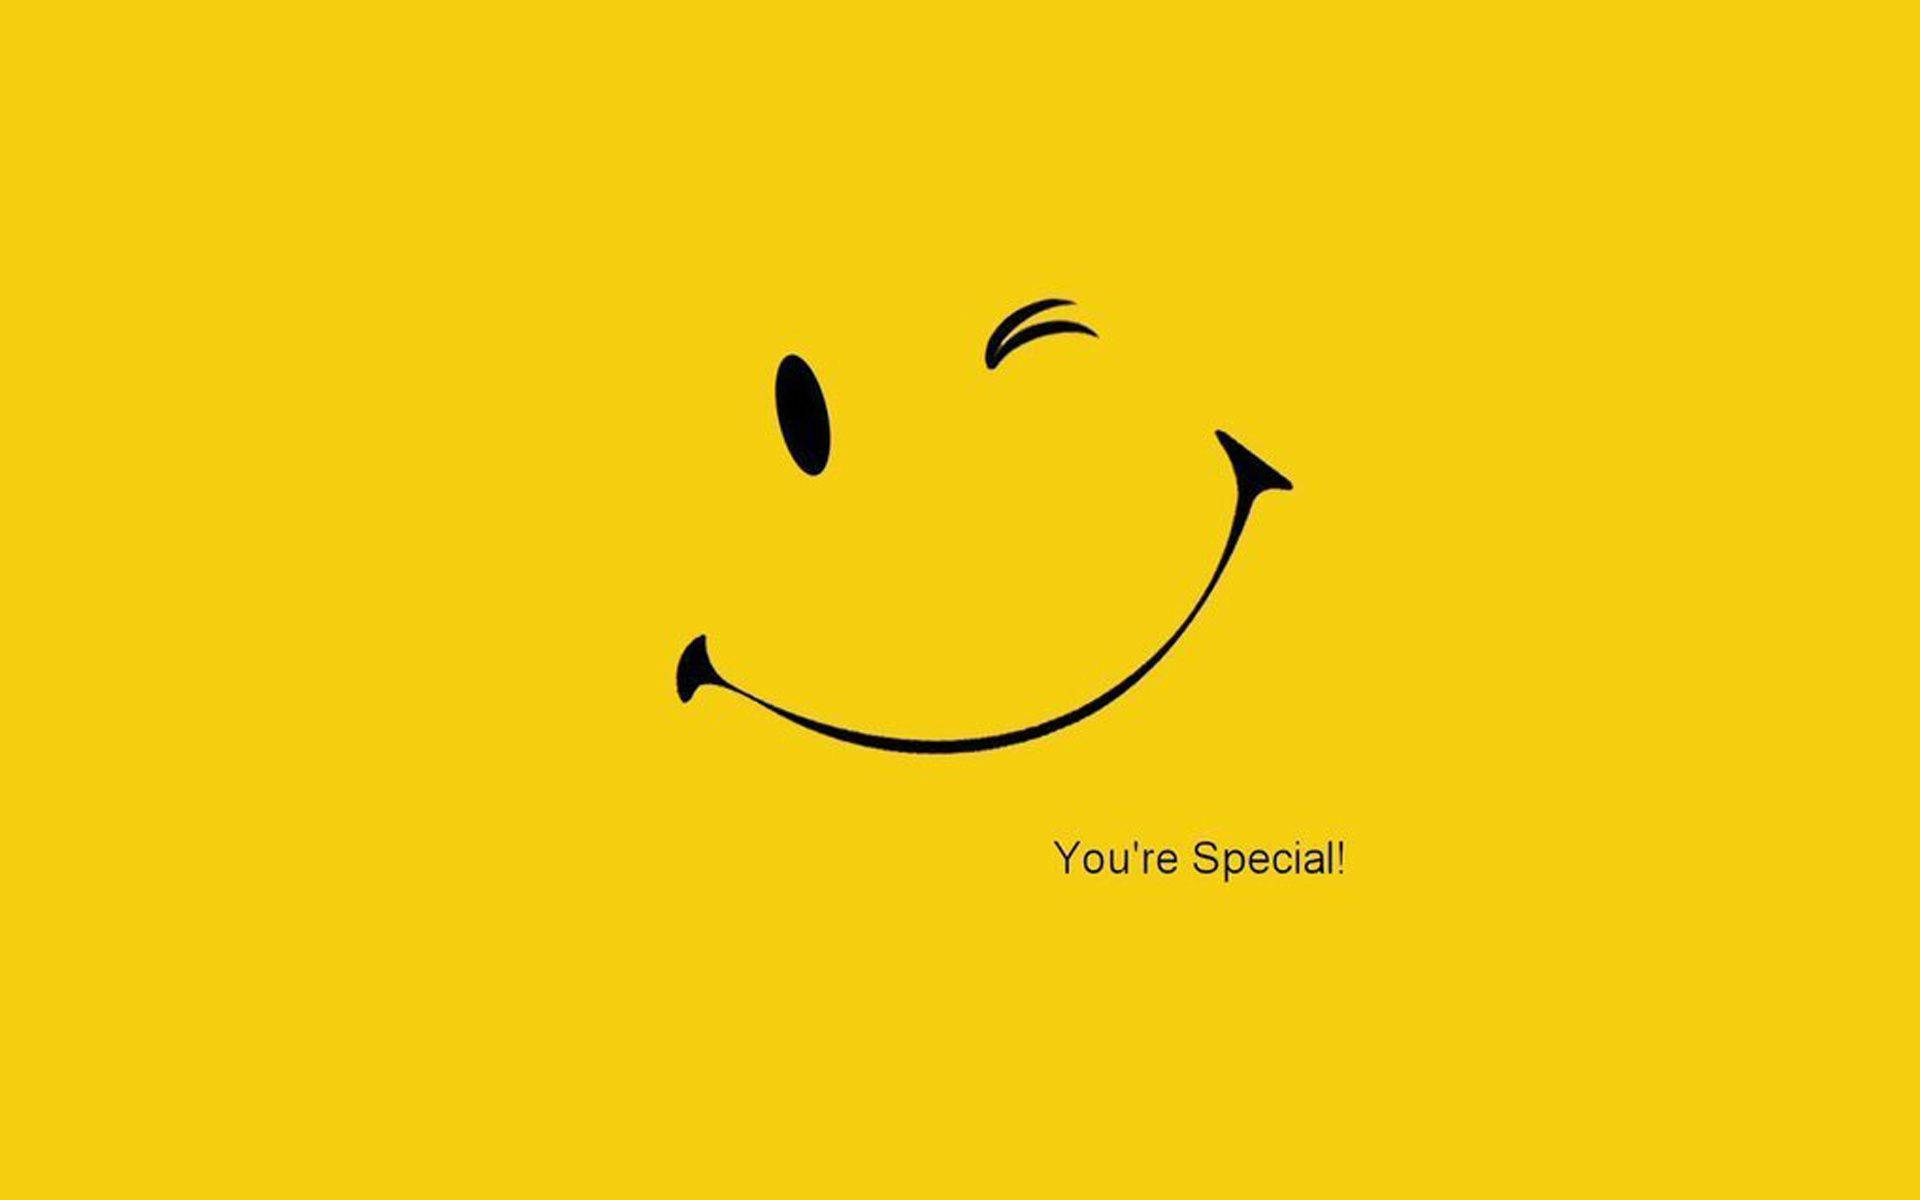 Inspirational Smiley You're Special Wallpaper